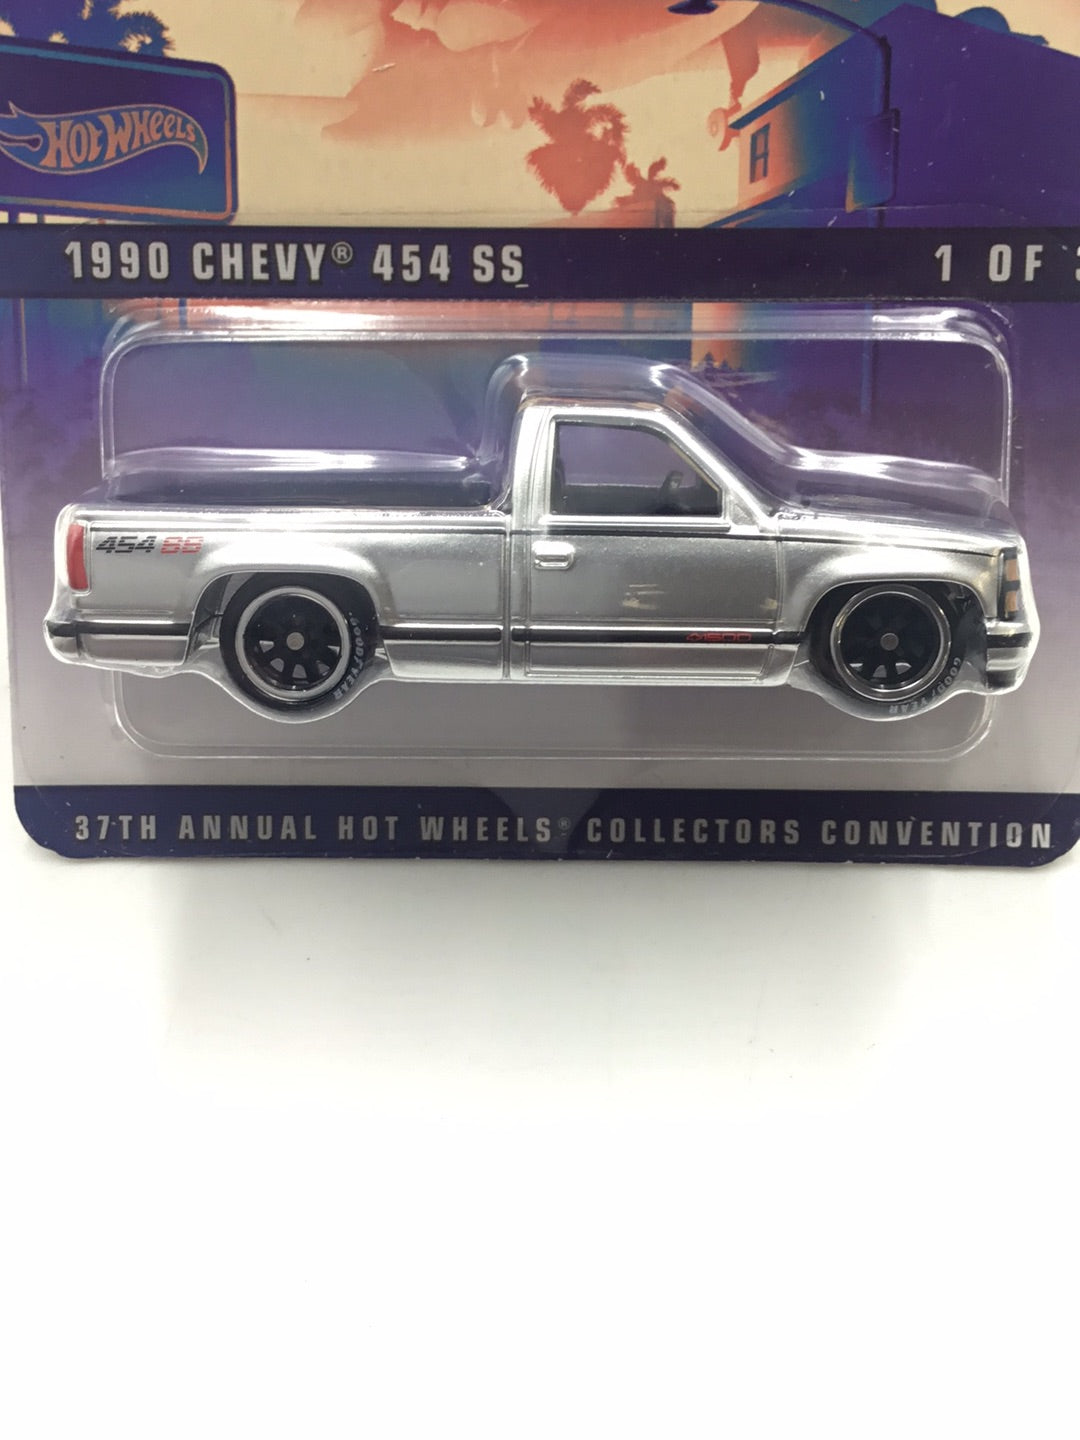 Hot wheels 1990 Chevy 454 SS 37th annual collectors convention 